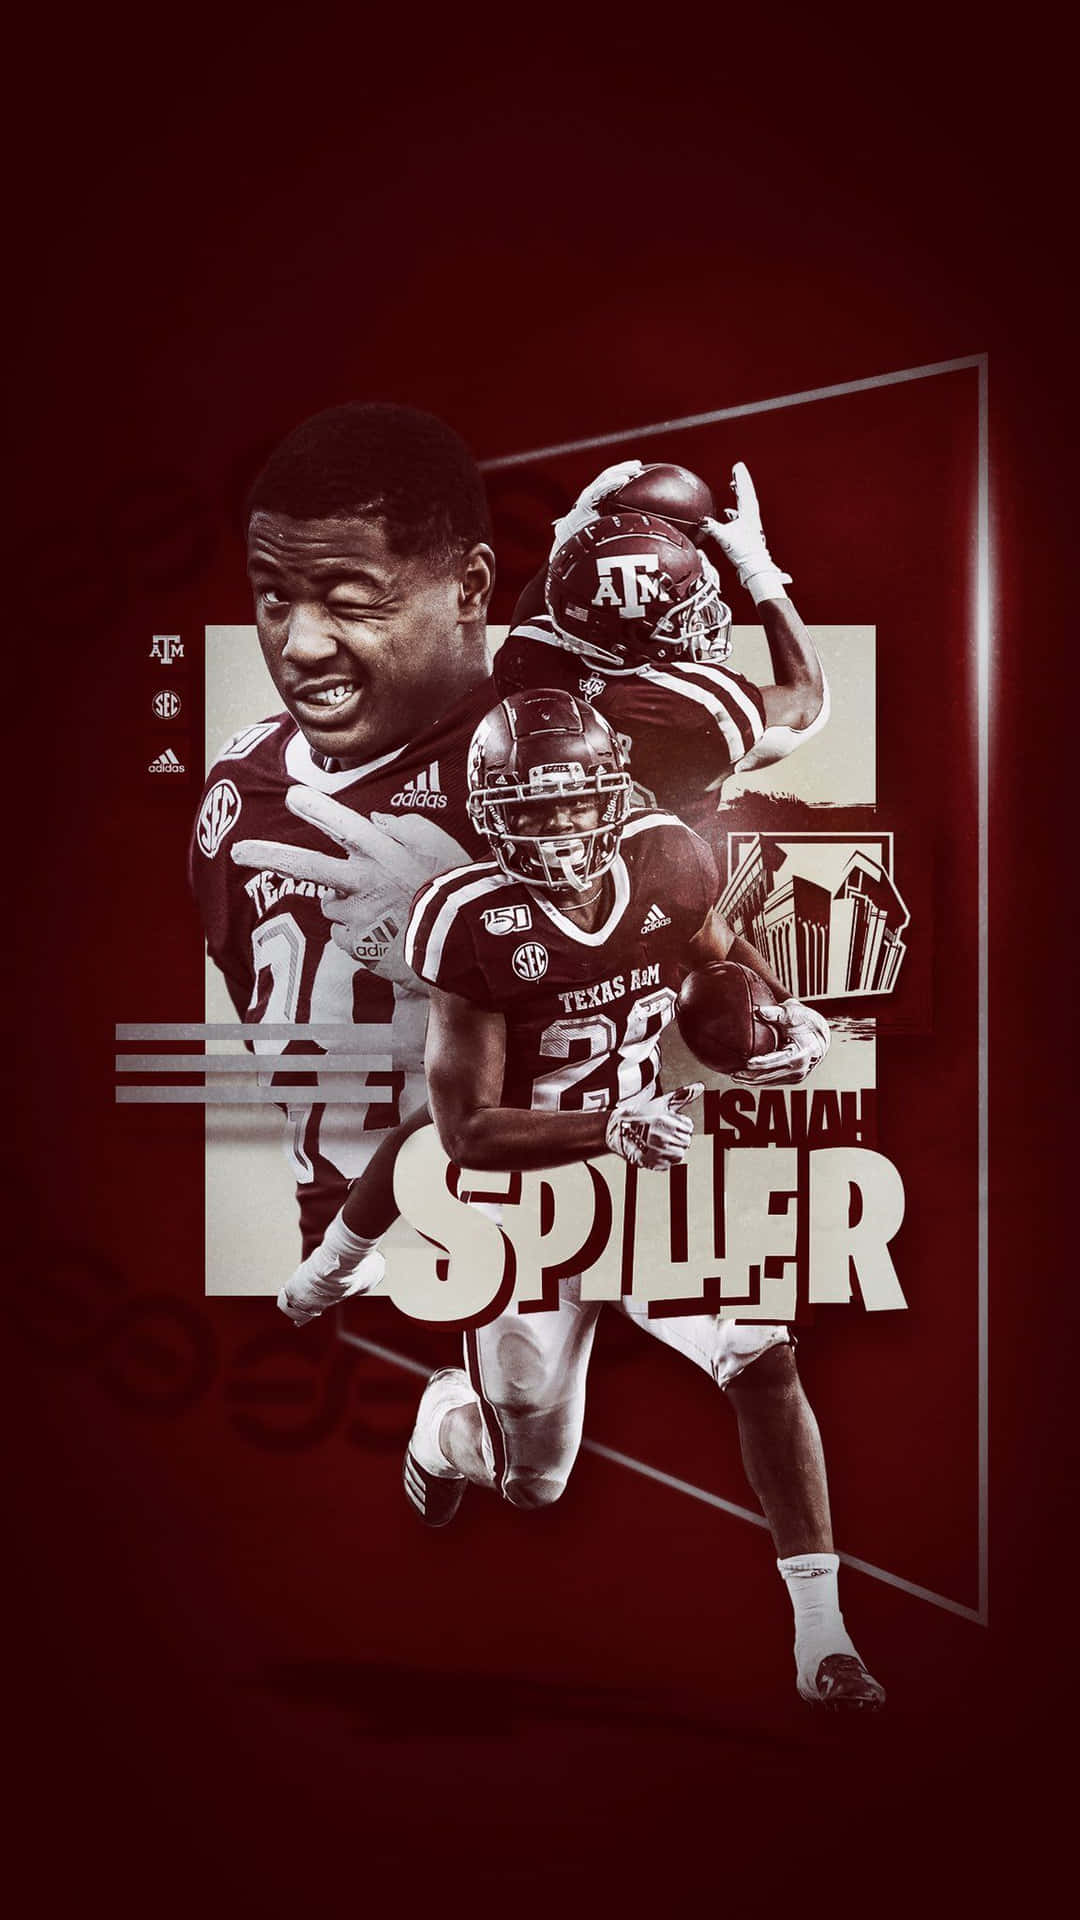 A Football Player With The Name Spiller Wallpaper